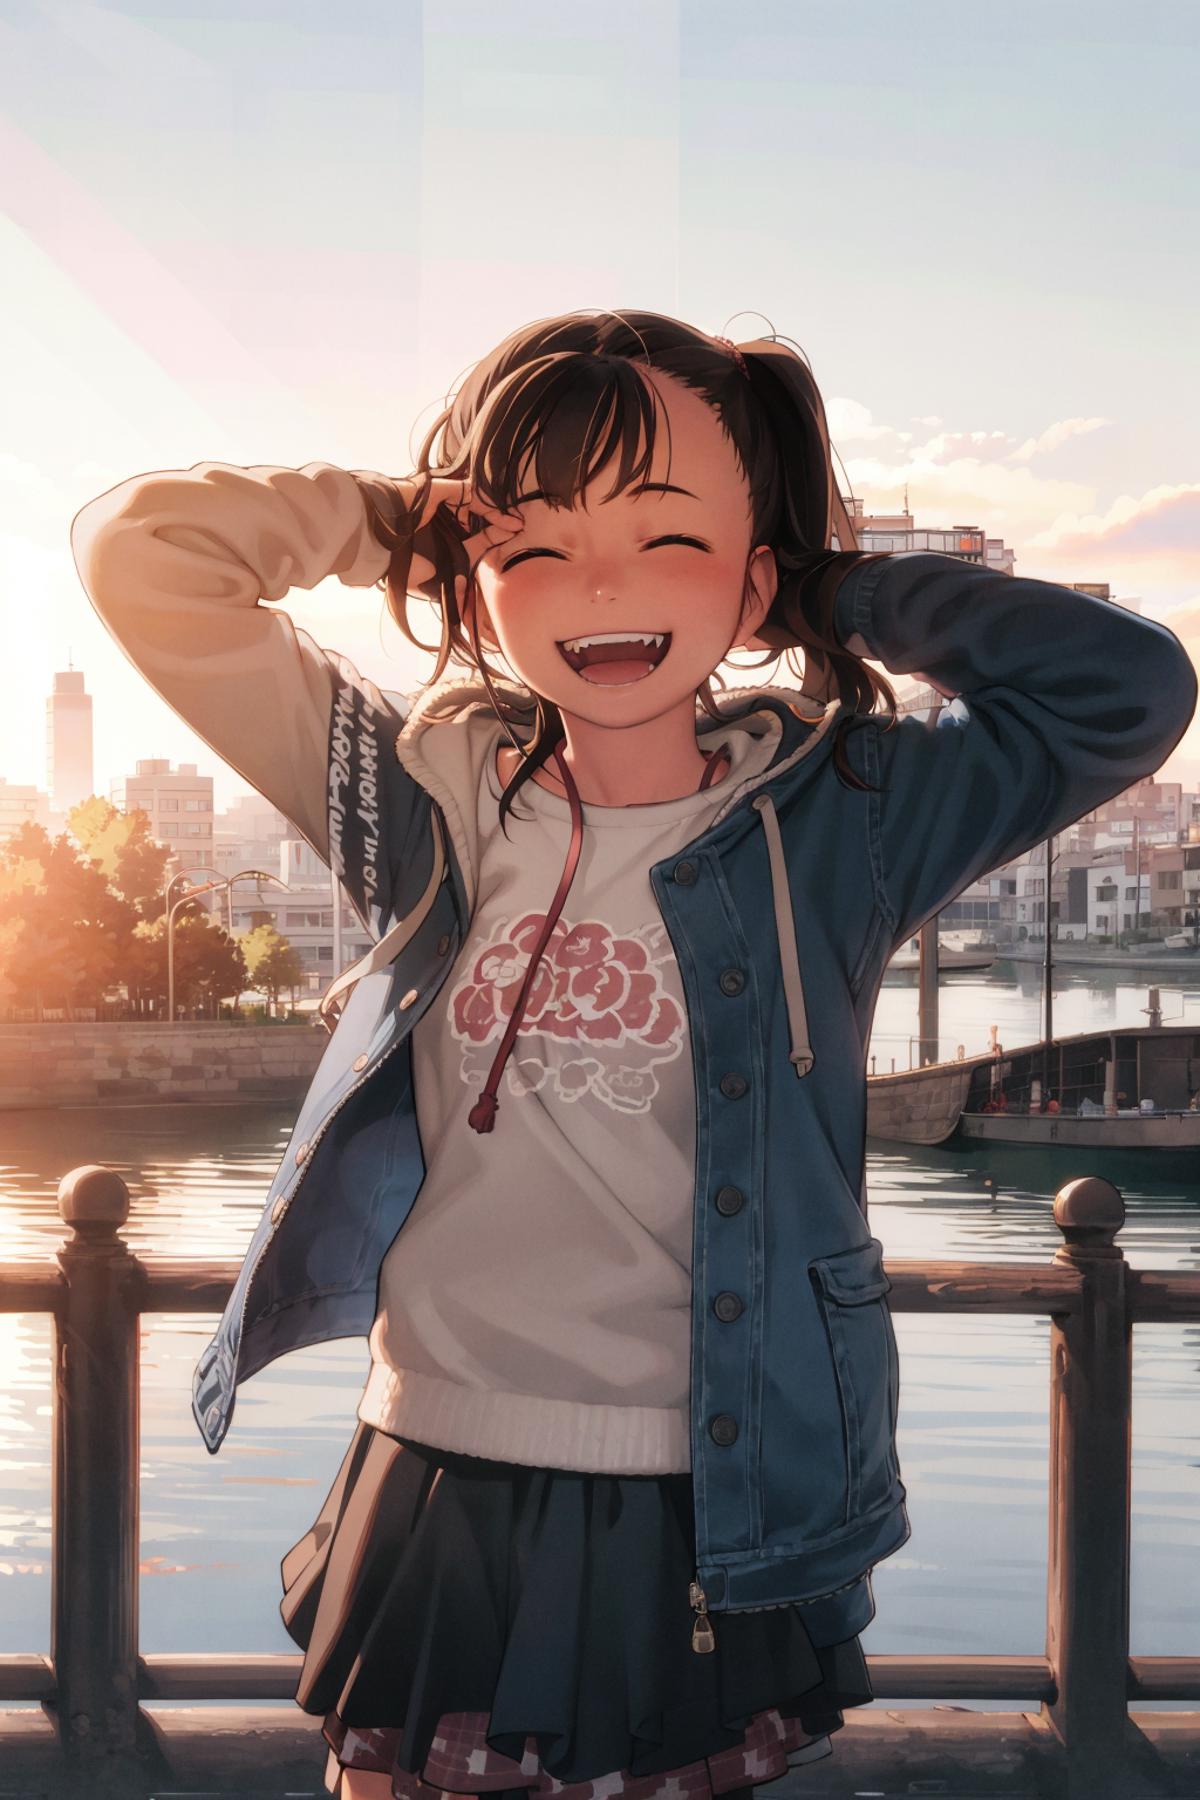 A young girl wearing a blue jacket and a smile, with a city in the background.